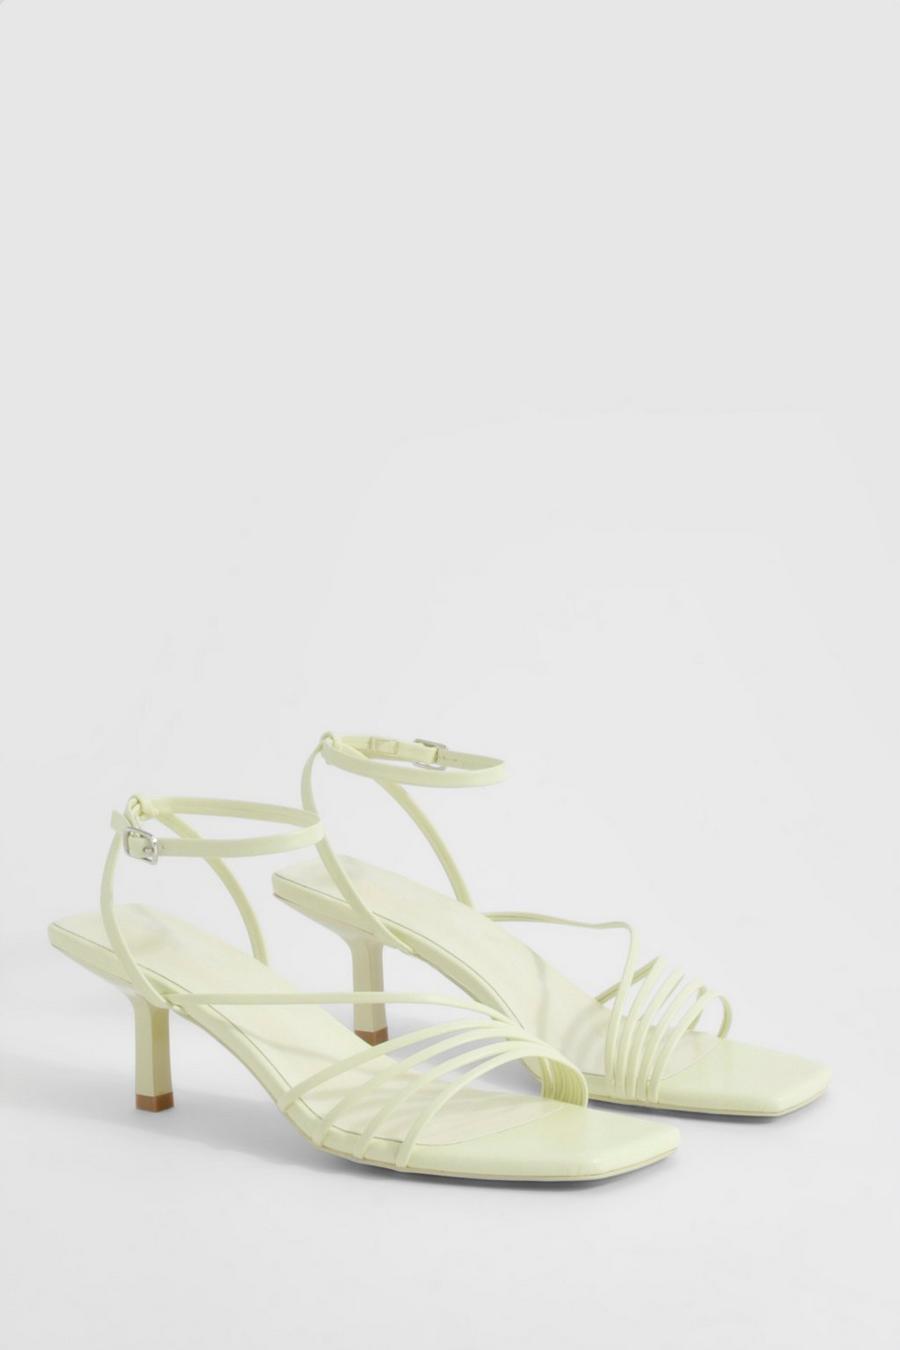 Washed lime Asymmetric Low Heels